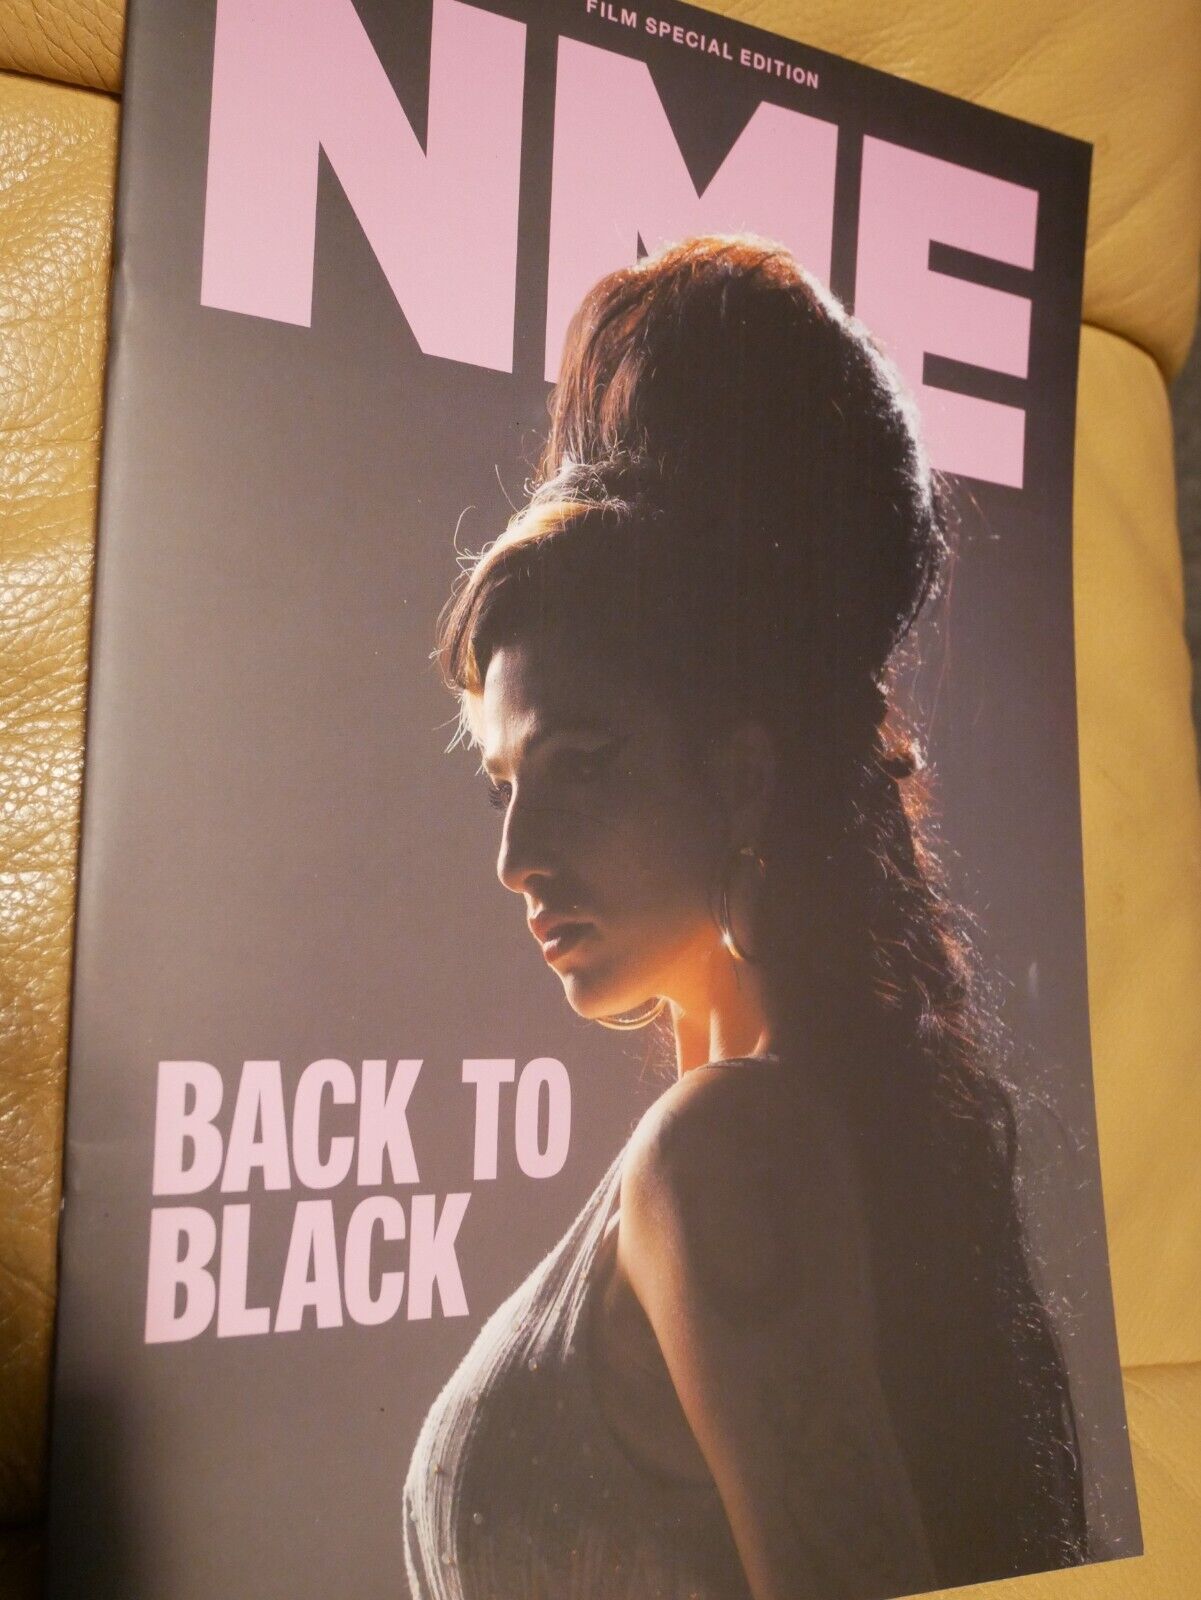 AMY WINEHOUSE BACK TO BLACK MOVIE NME SPECIAL PROMOTIONAL MAGAZINE